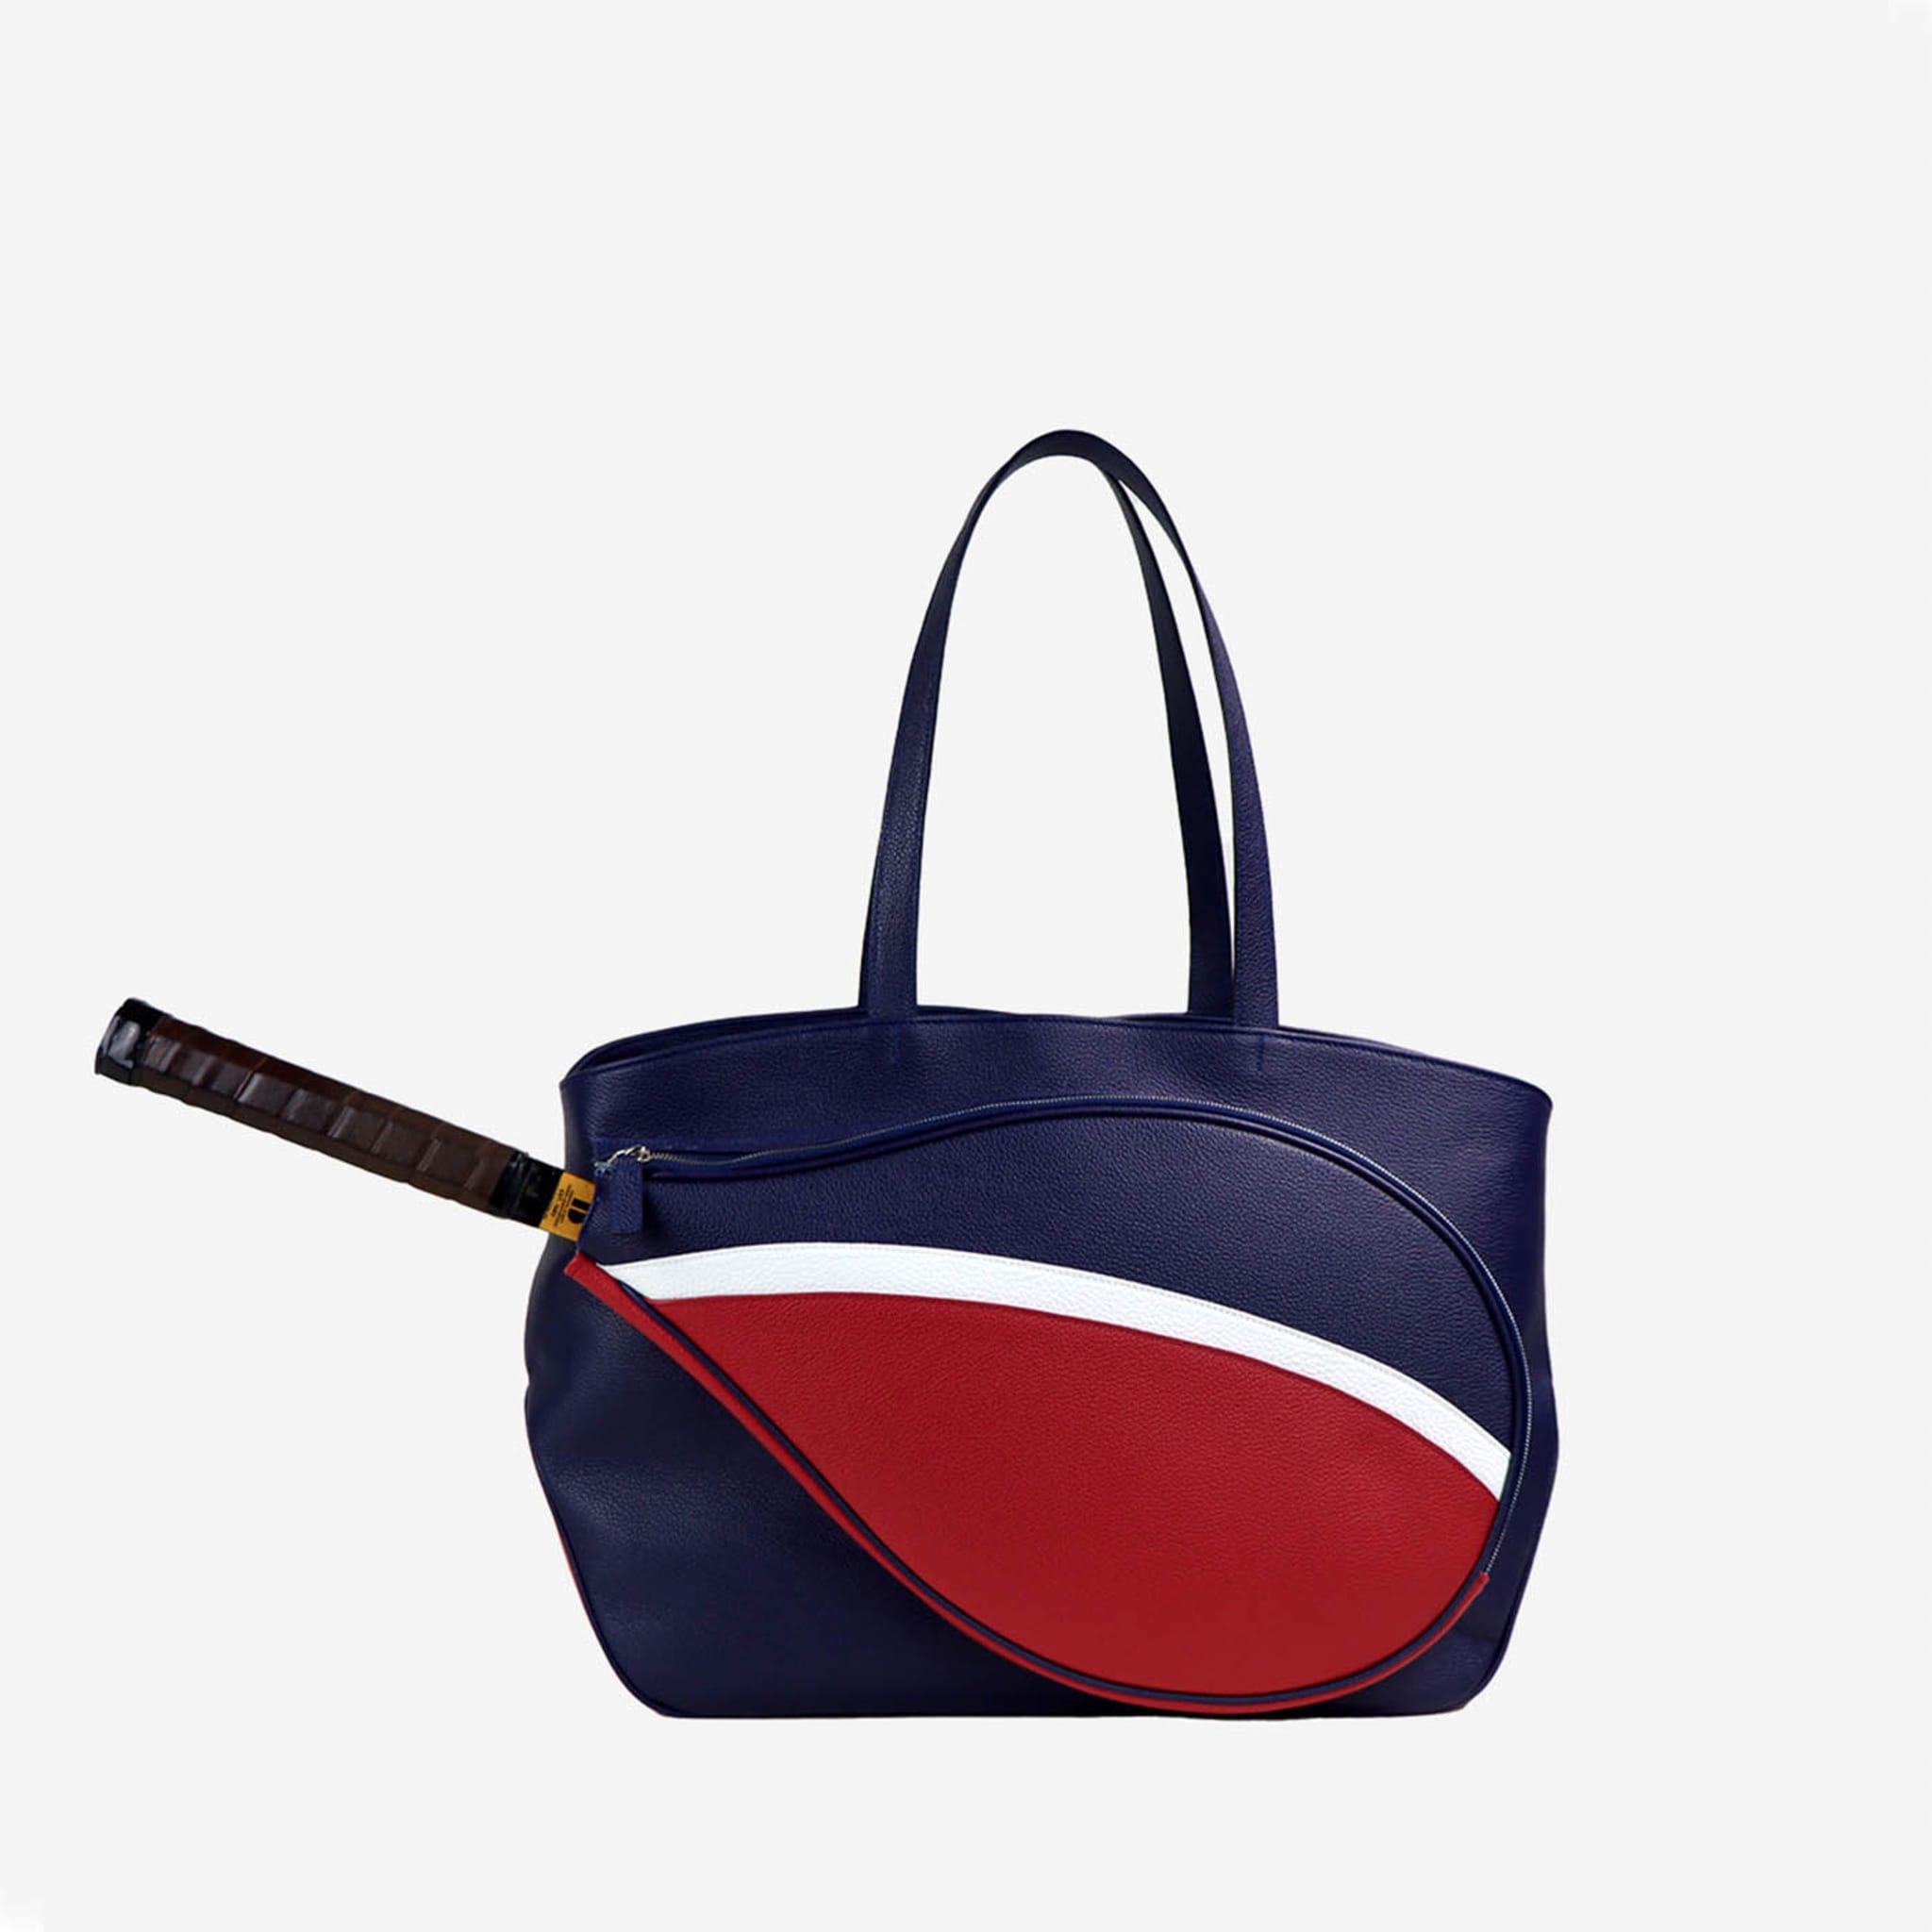 Sport Blue & Red Bag with Tennis-Racket-Shaped Pocket - Alternative view 3